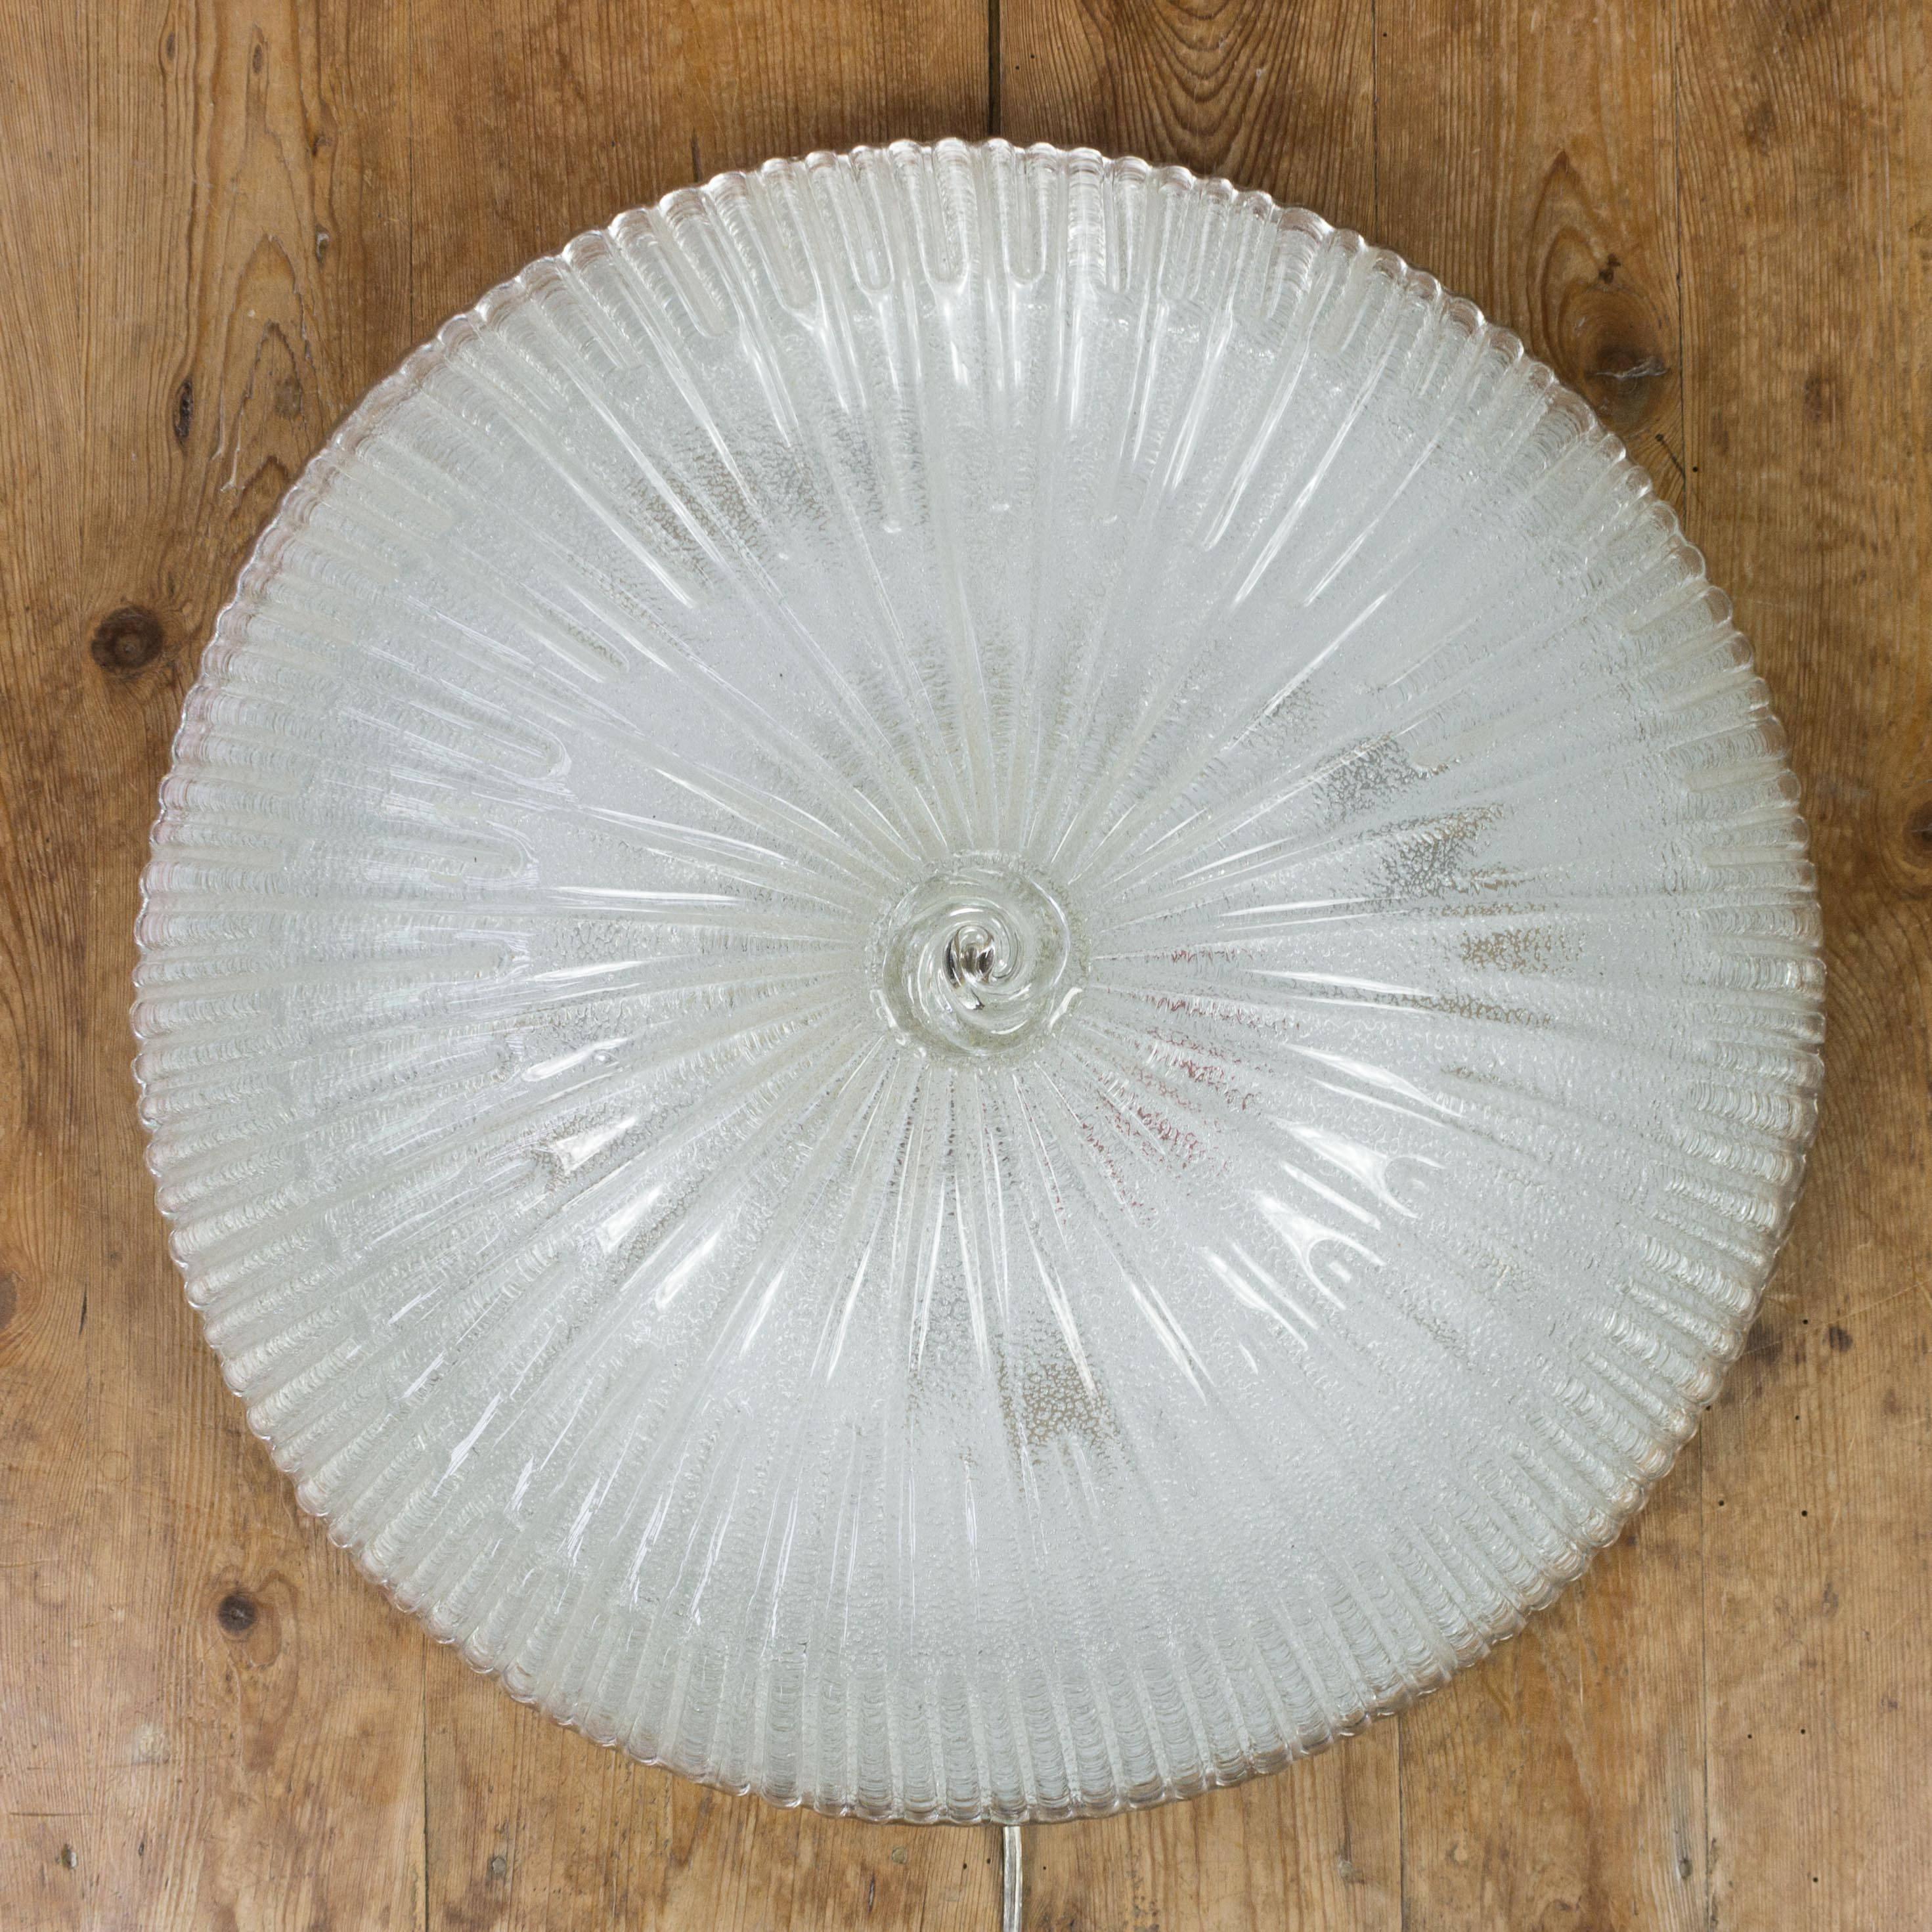 Pair of 1950s ribbed and textured glass fixtures with glass finials. The fixtures will be rewired to UL standards and refitted so they can be professionally installed and mounted on a metal frame with three lights.